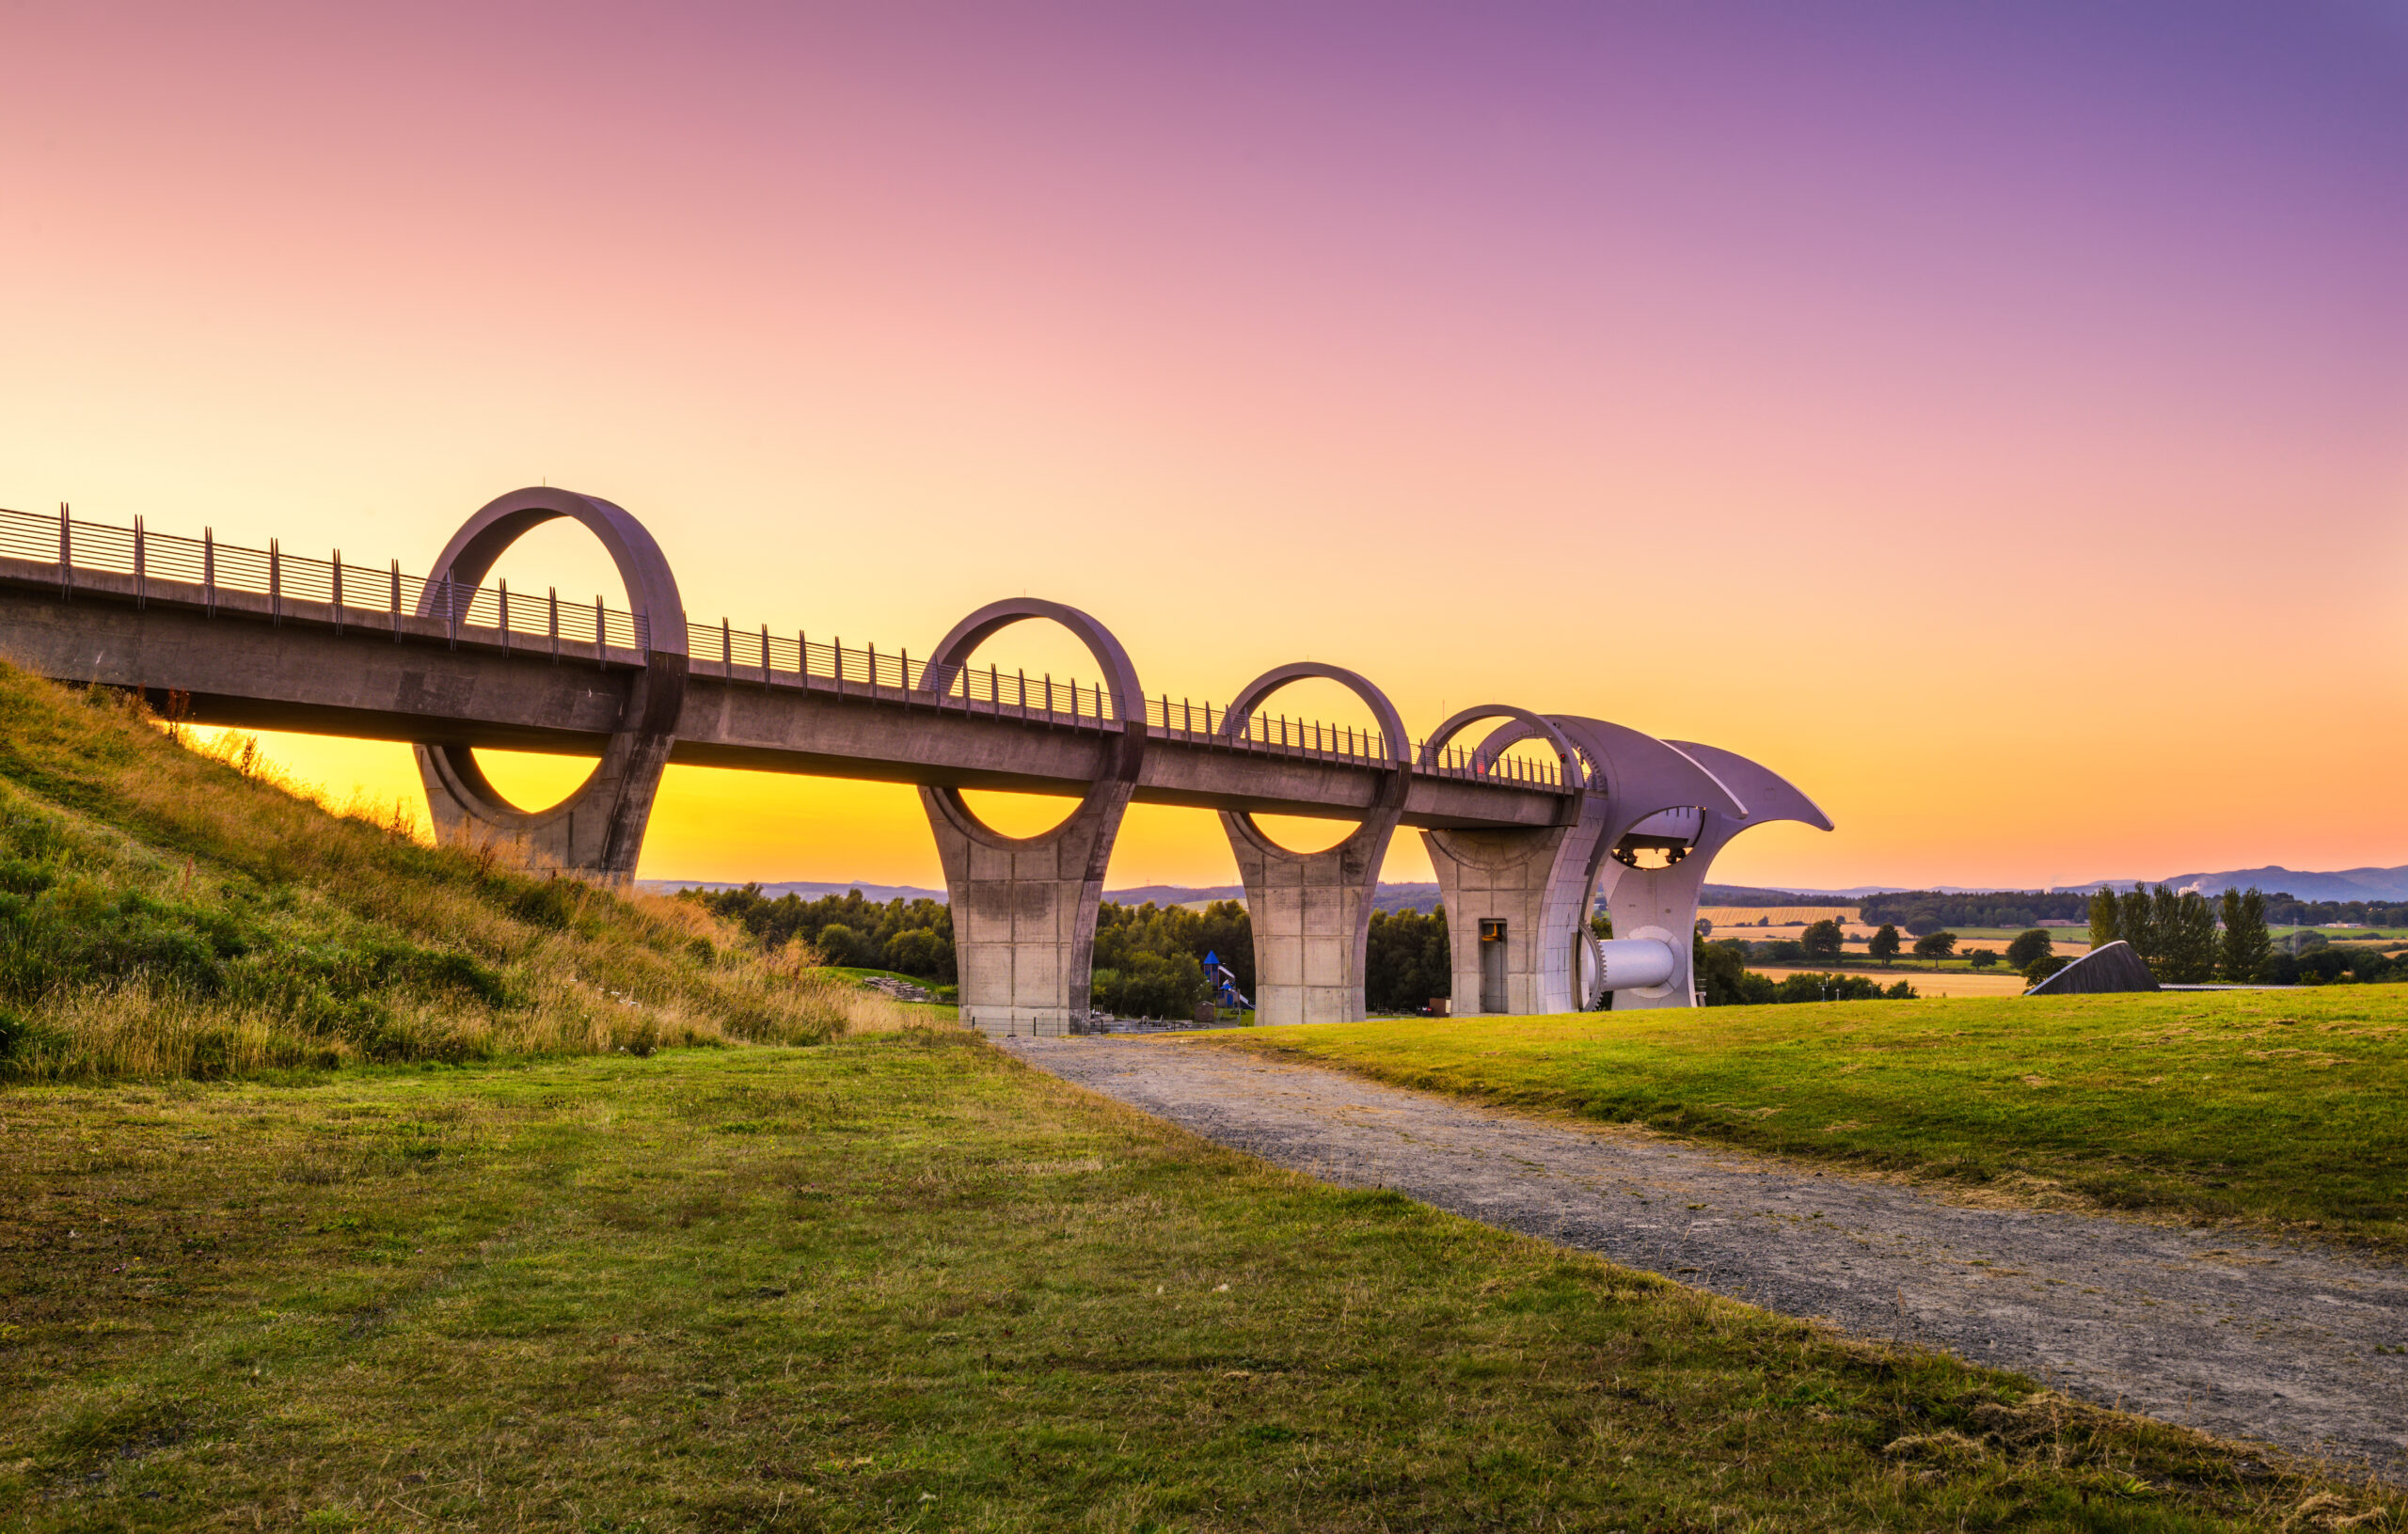 Falkirk Wheel at sunset. Falkirk Wheel is a rotating boat lift in Scotland and connects the Forth and Clyde Canal with the Union Canal.